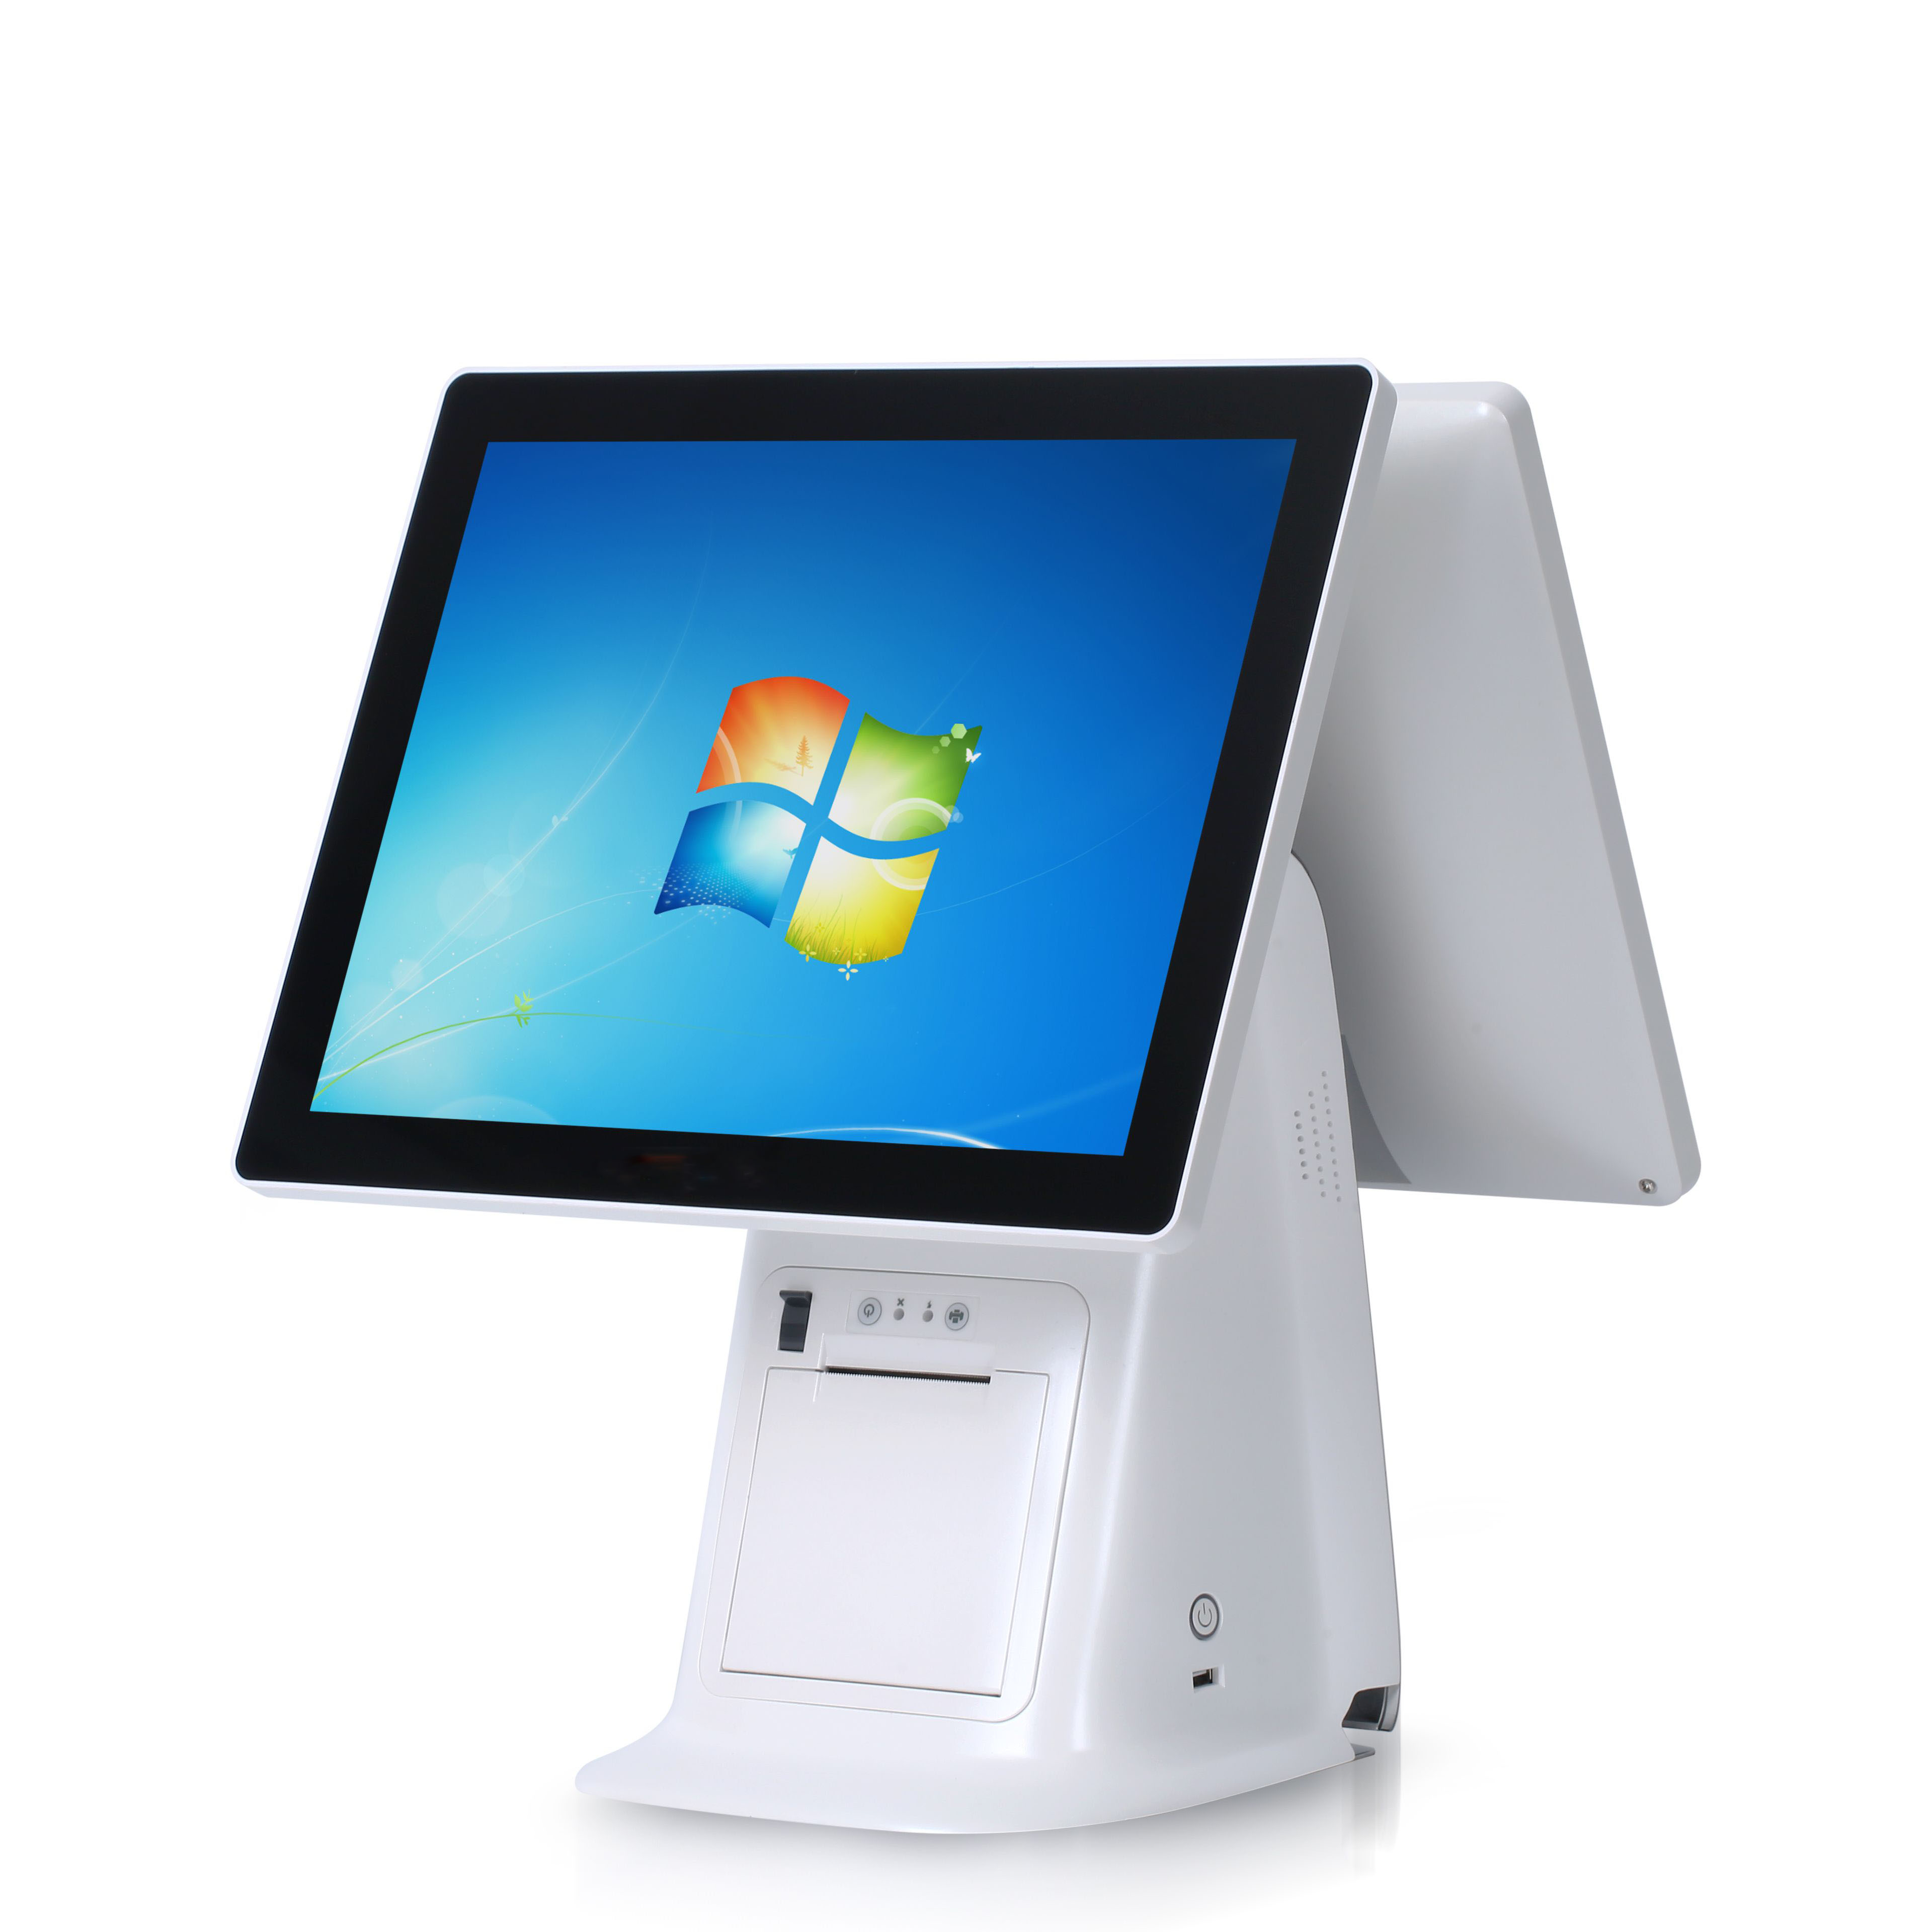 POS-G156 15,6-Zoll-Windows-Restaurant All-in-One-POS-System Touchscreen-Android-POS-Maschine mit Drucker